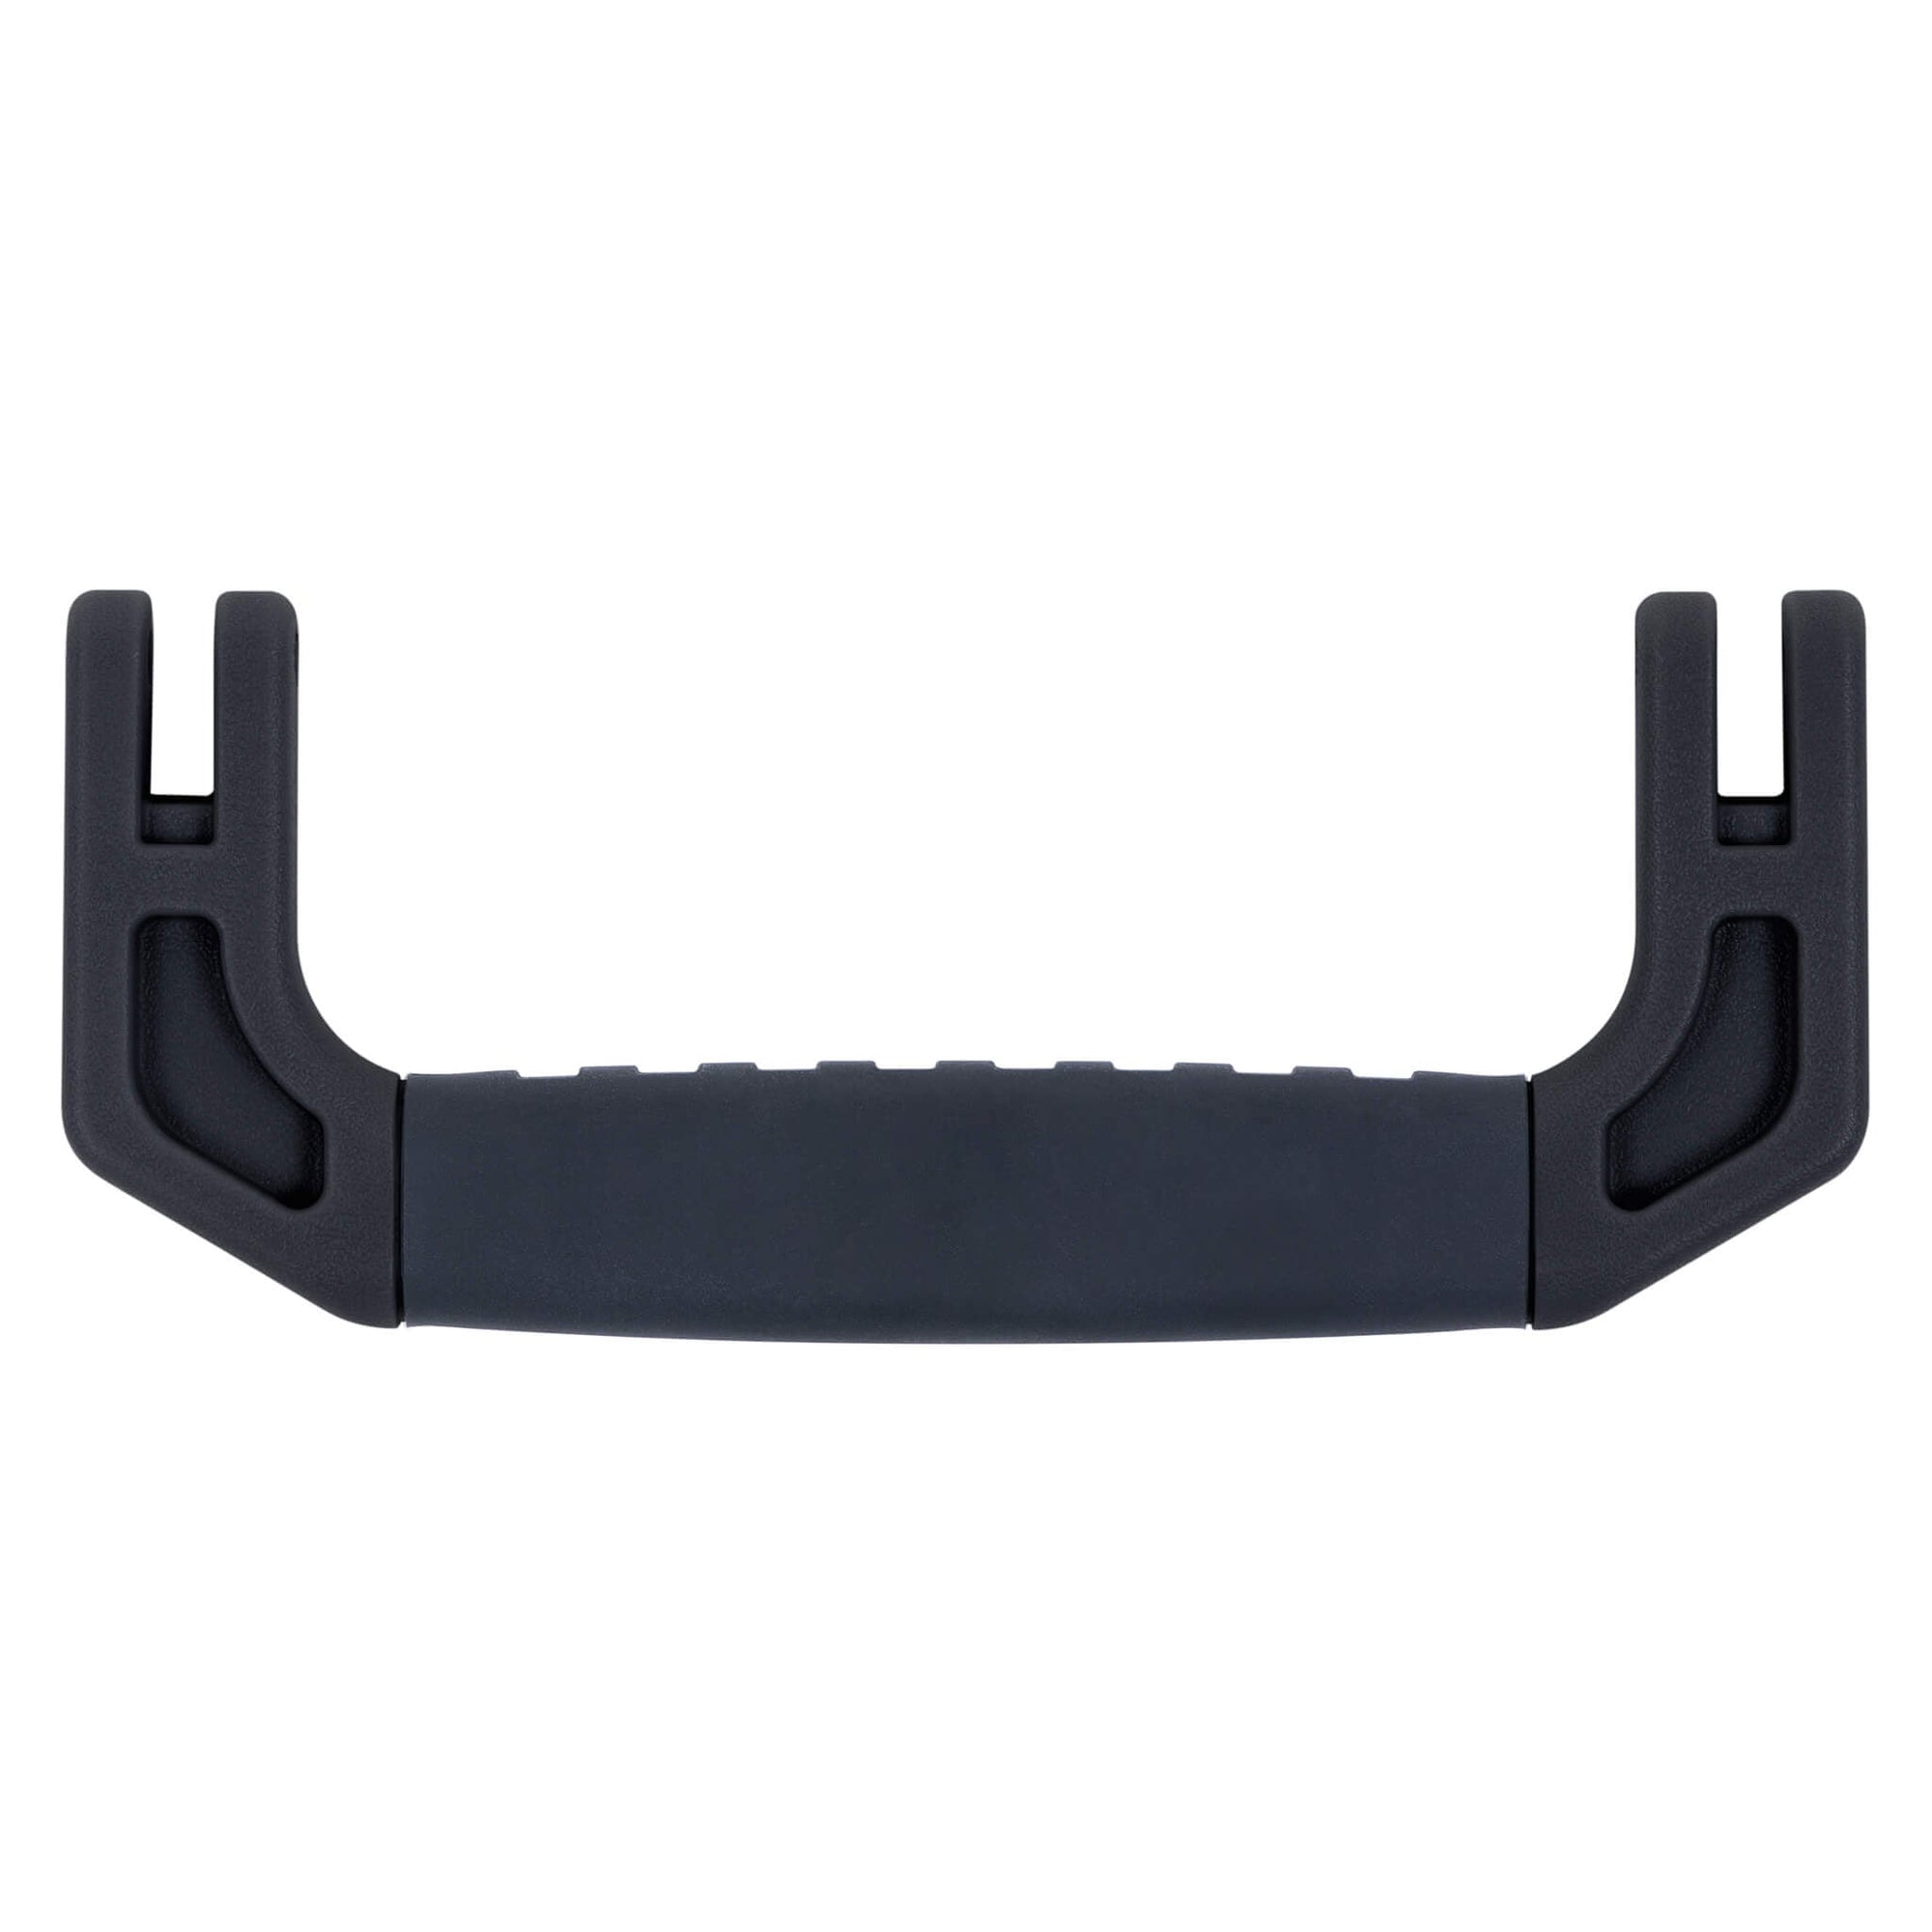 Pelican 1535 Air Rubber Overmolded Replacement Top Handle, Black ColorCase 